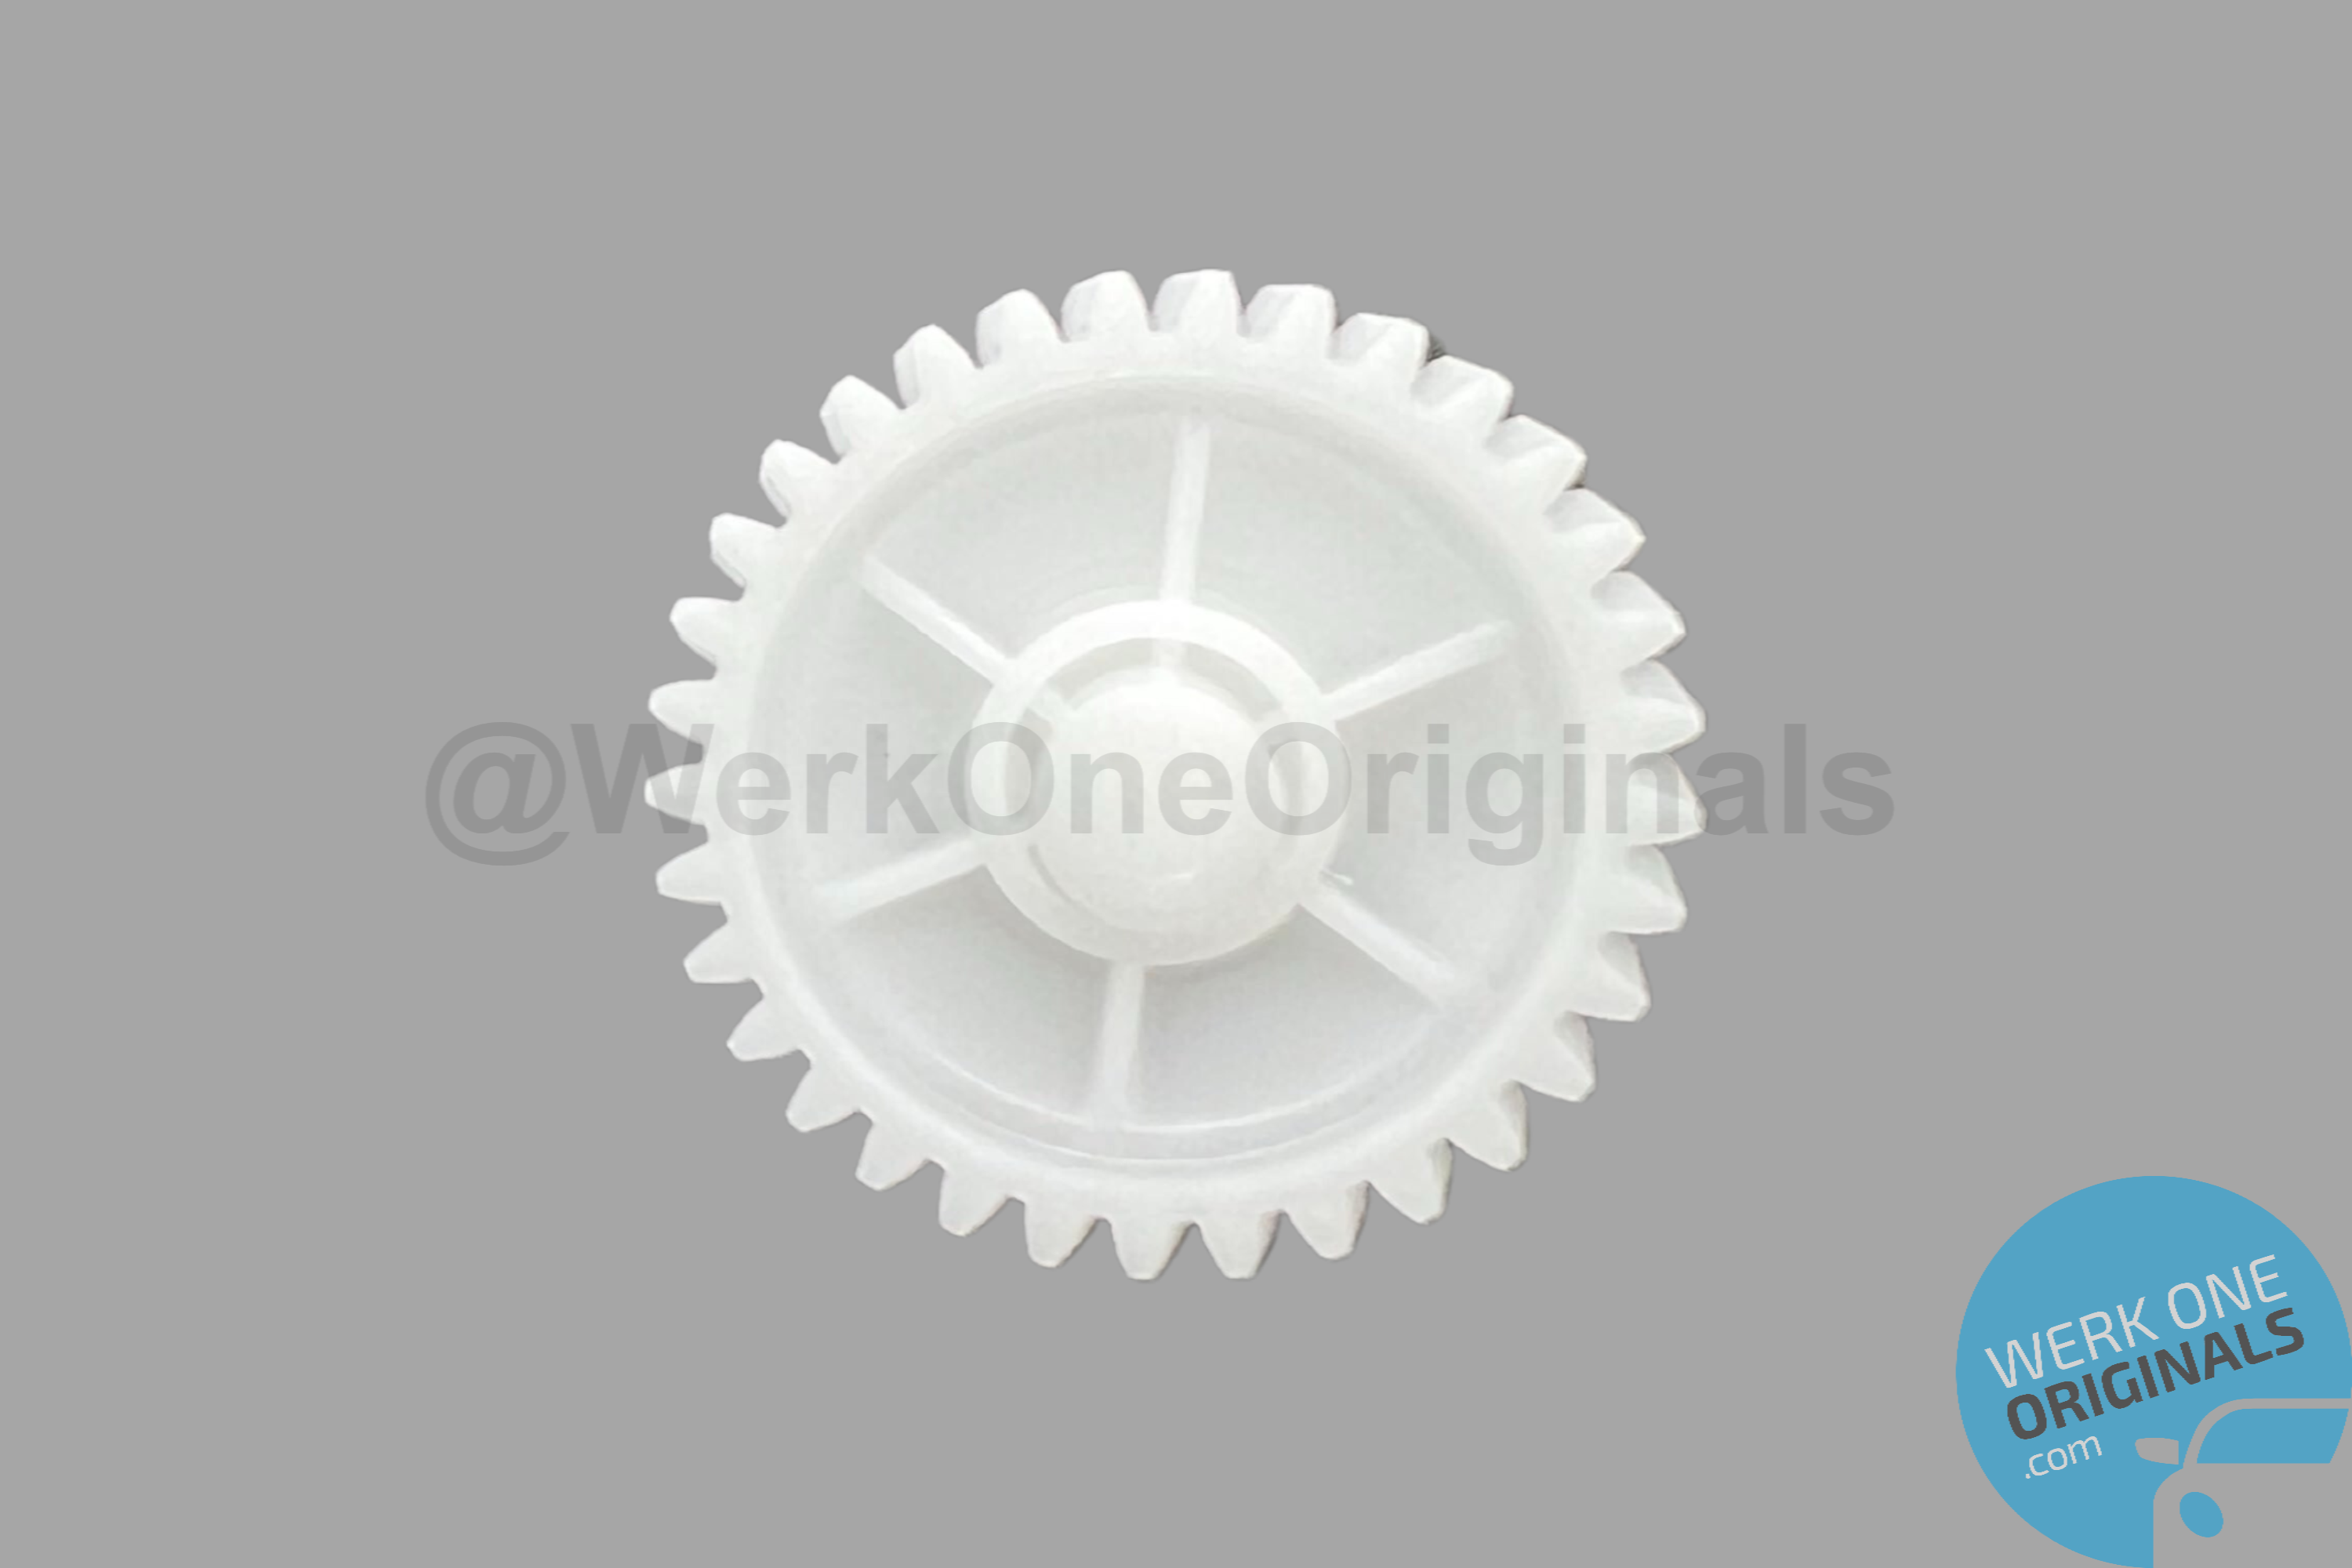 Porsche Genuine Replacement Sunroof Drive Gear for 924S Models